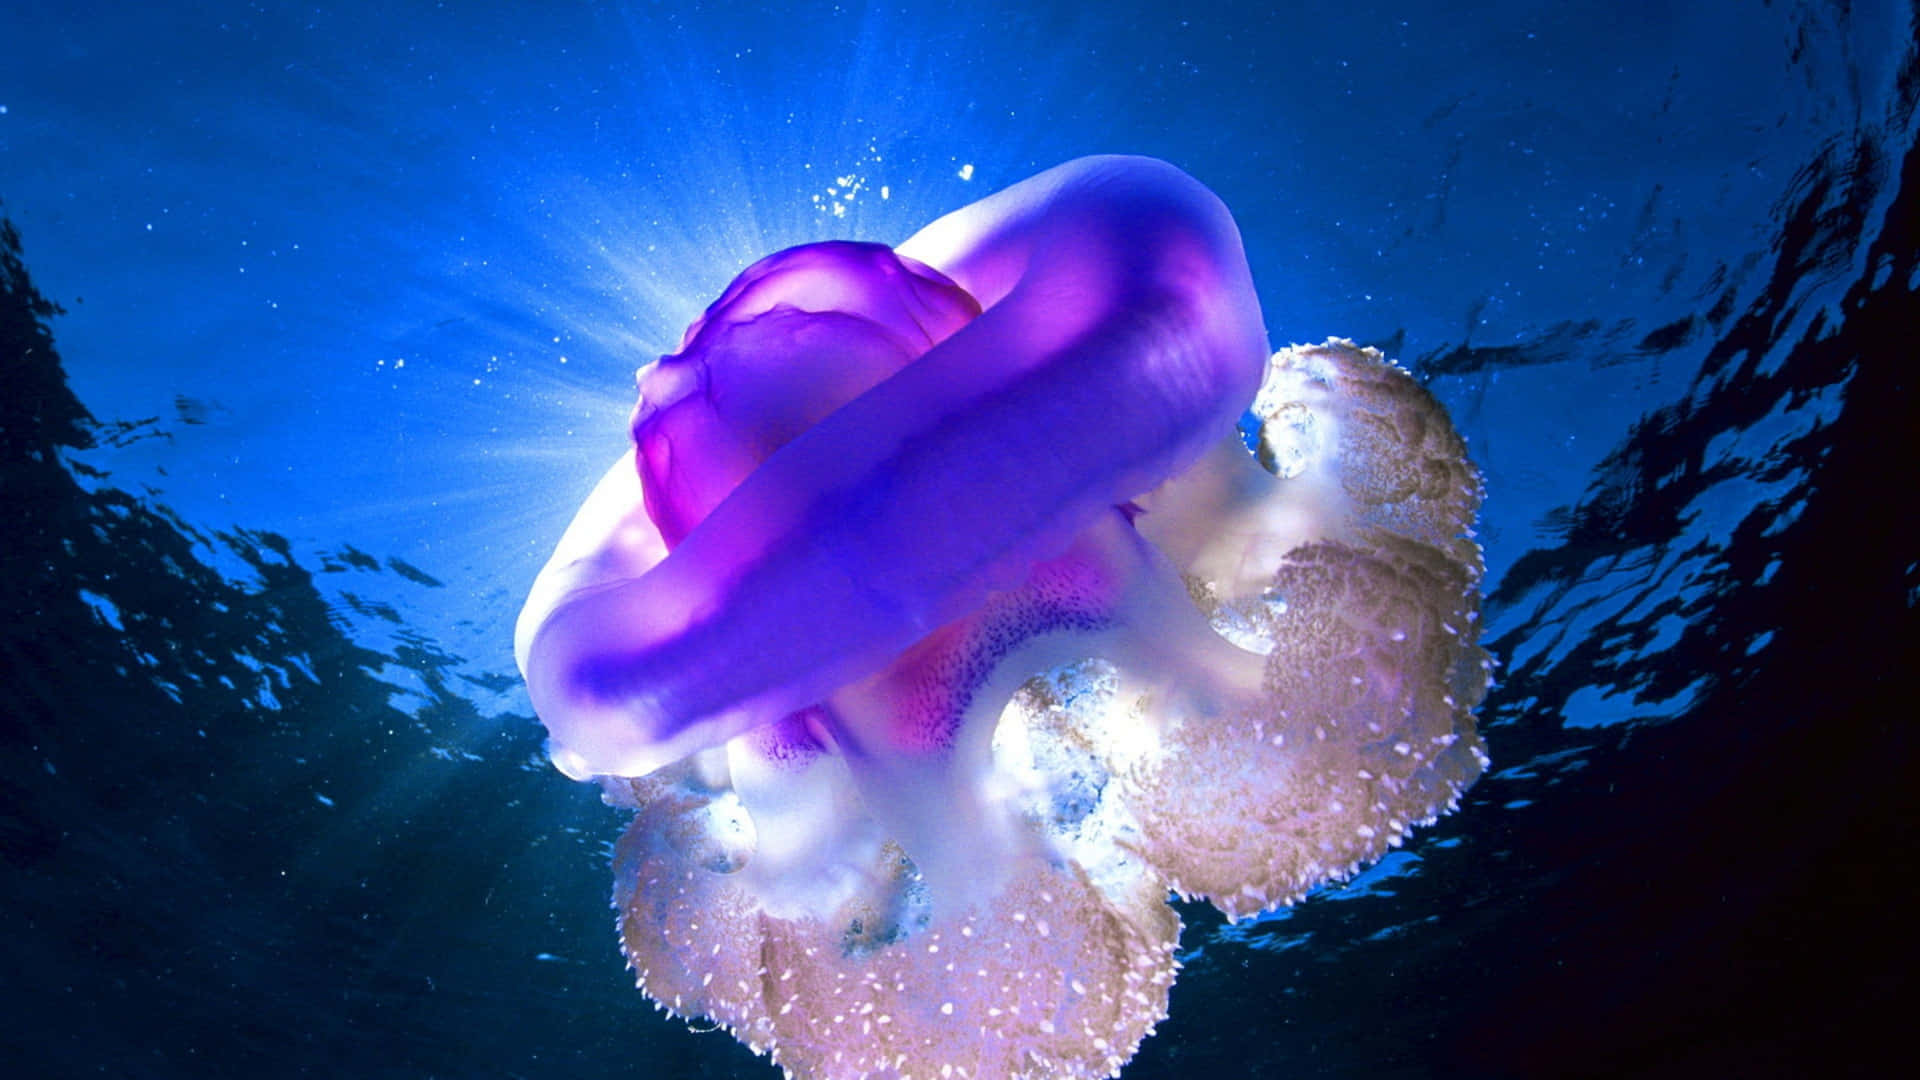 Explore the Wonders of the Ocean with a 4K Jellyfish Wallpaper Wallpaper